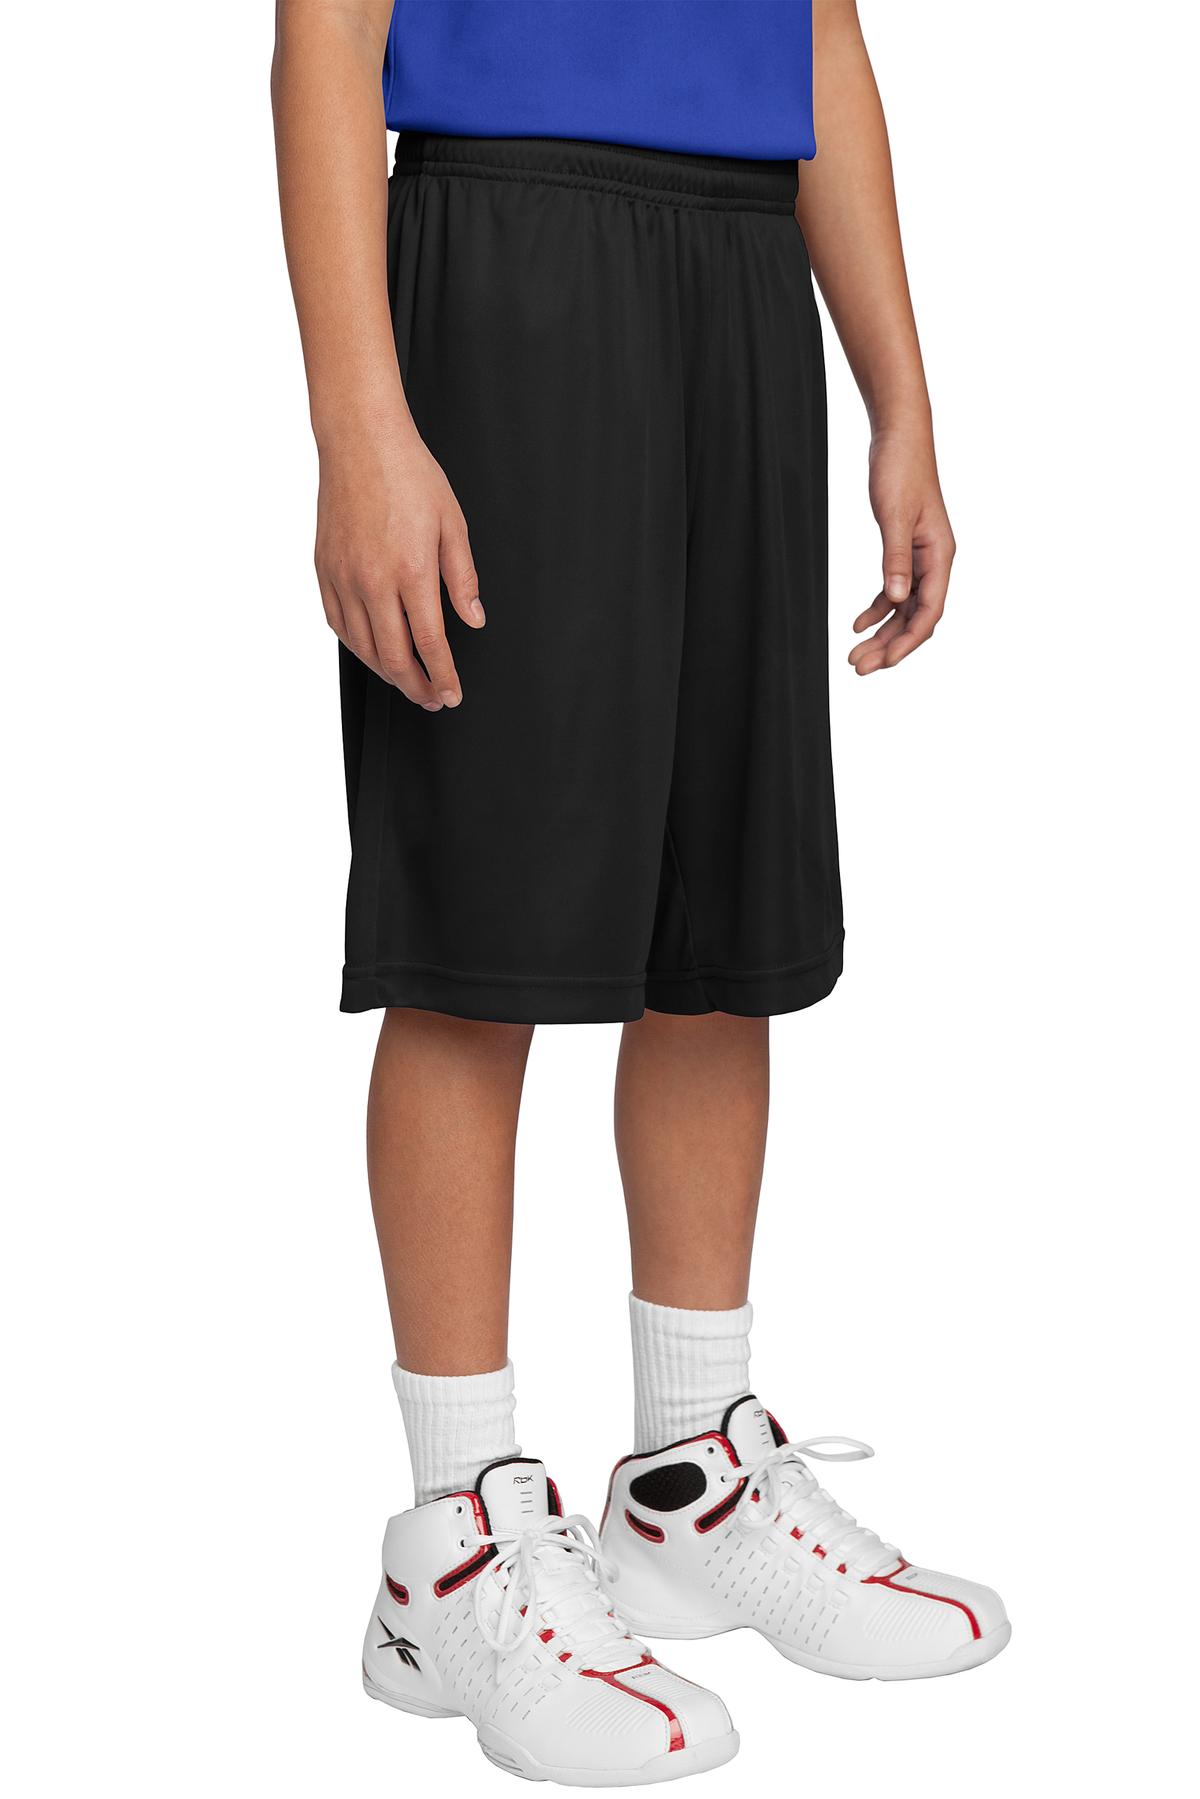 Sport-Tek Youth Activewear for Hospitality ® Youth PosiCharge® Competitor Short.-Sport-Tek